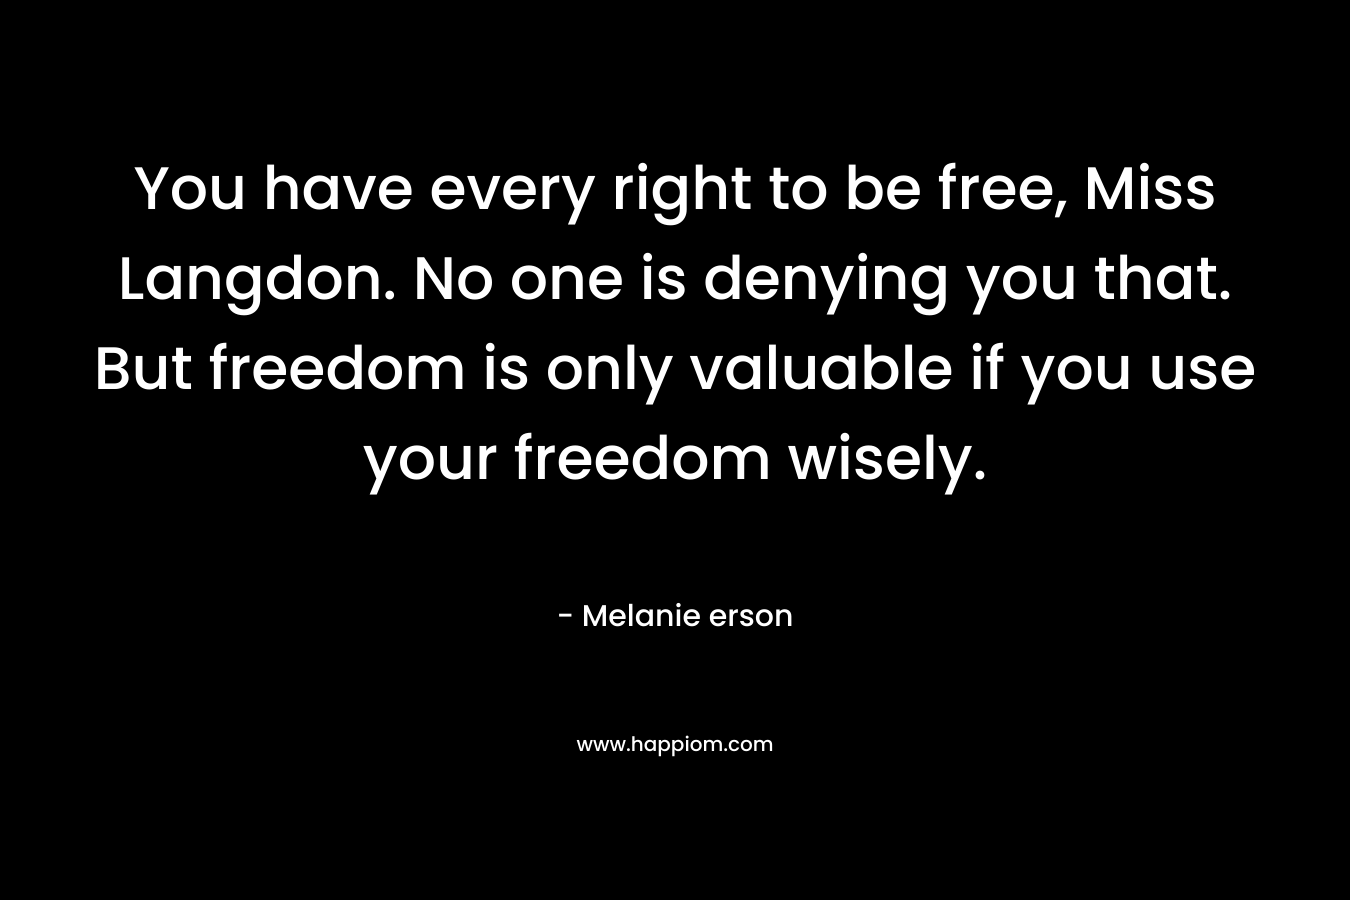 You have every right to be free, Miss Langdon. No one is denying you that. But freedom is only valuable if you use your freedom wisely. – Melanie erson